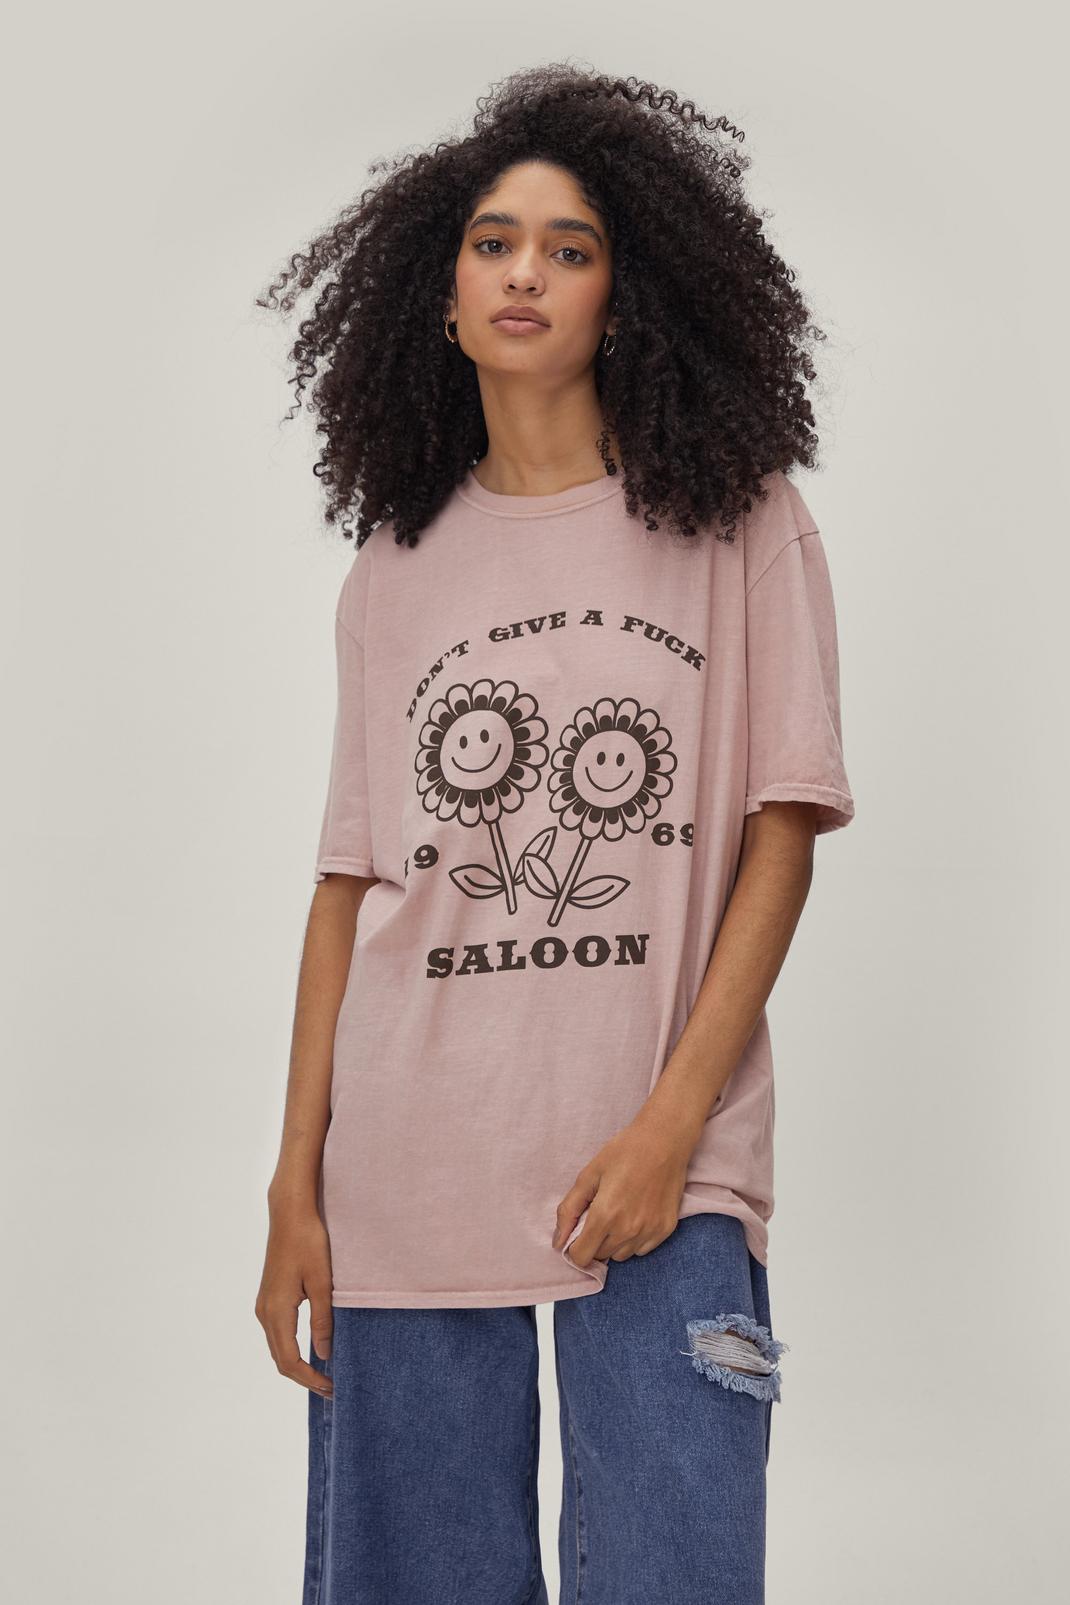 Sand Don't Give A Fuck Saloon T-shirt image number 1